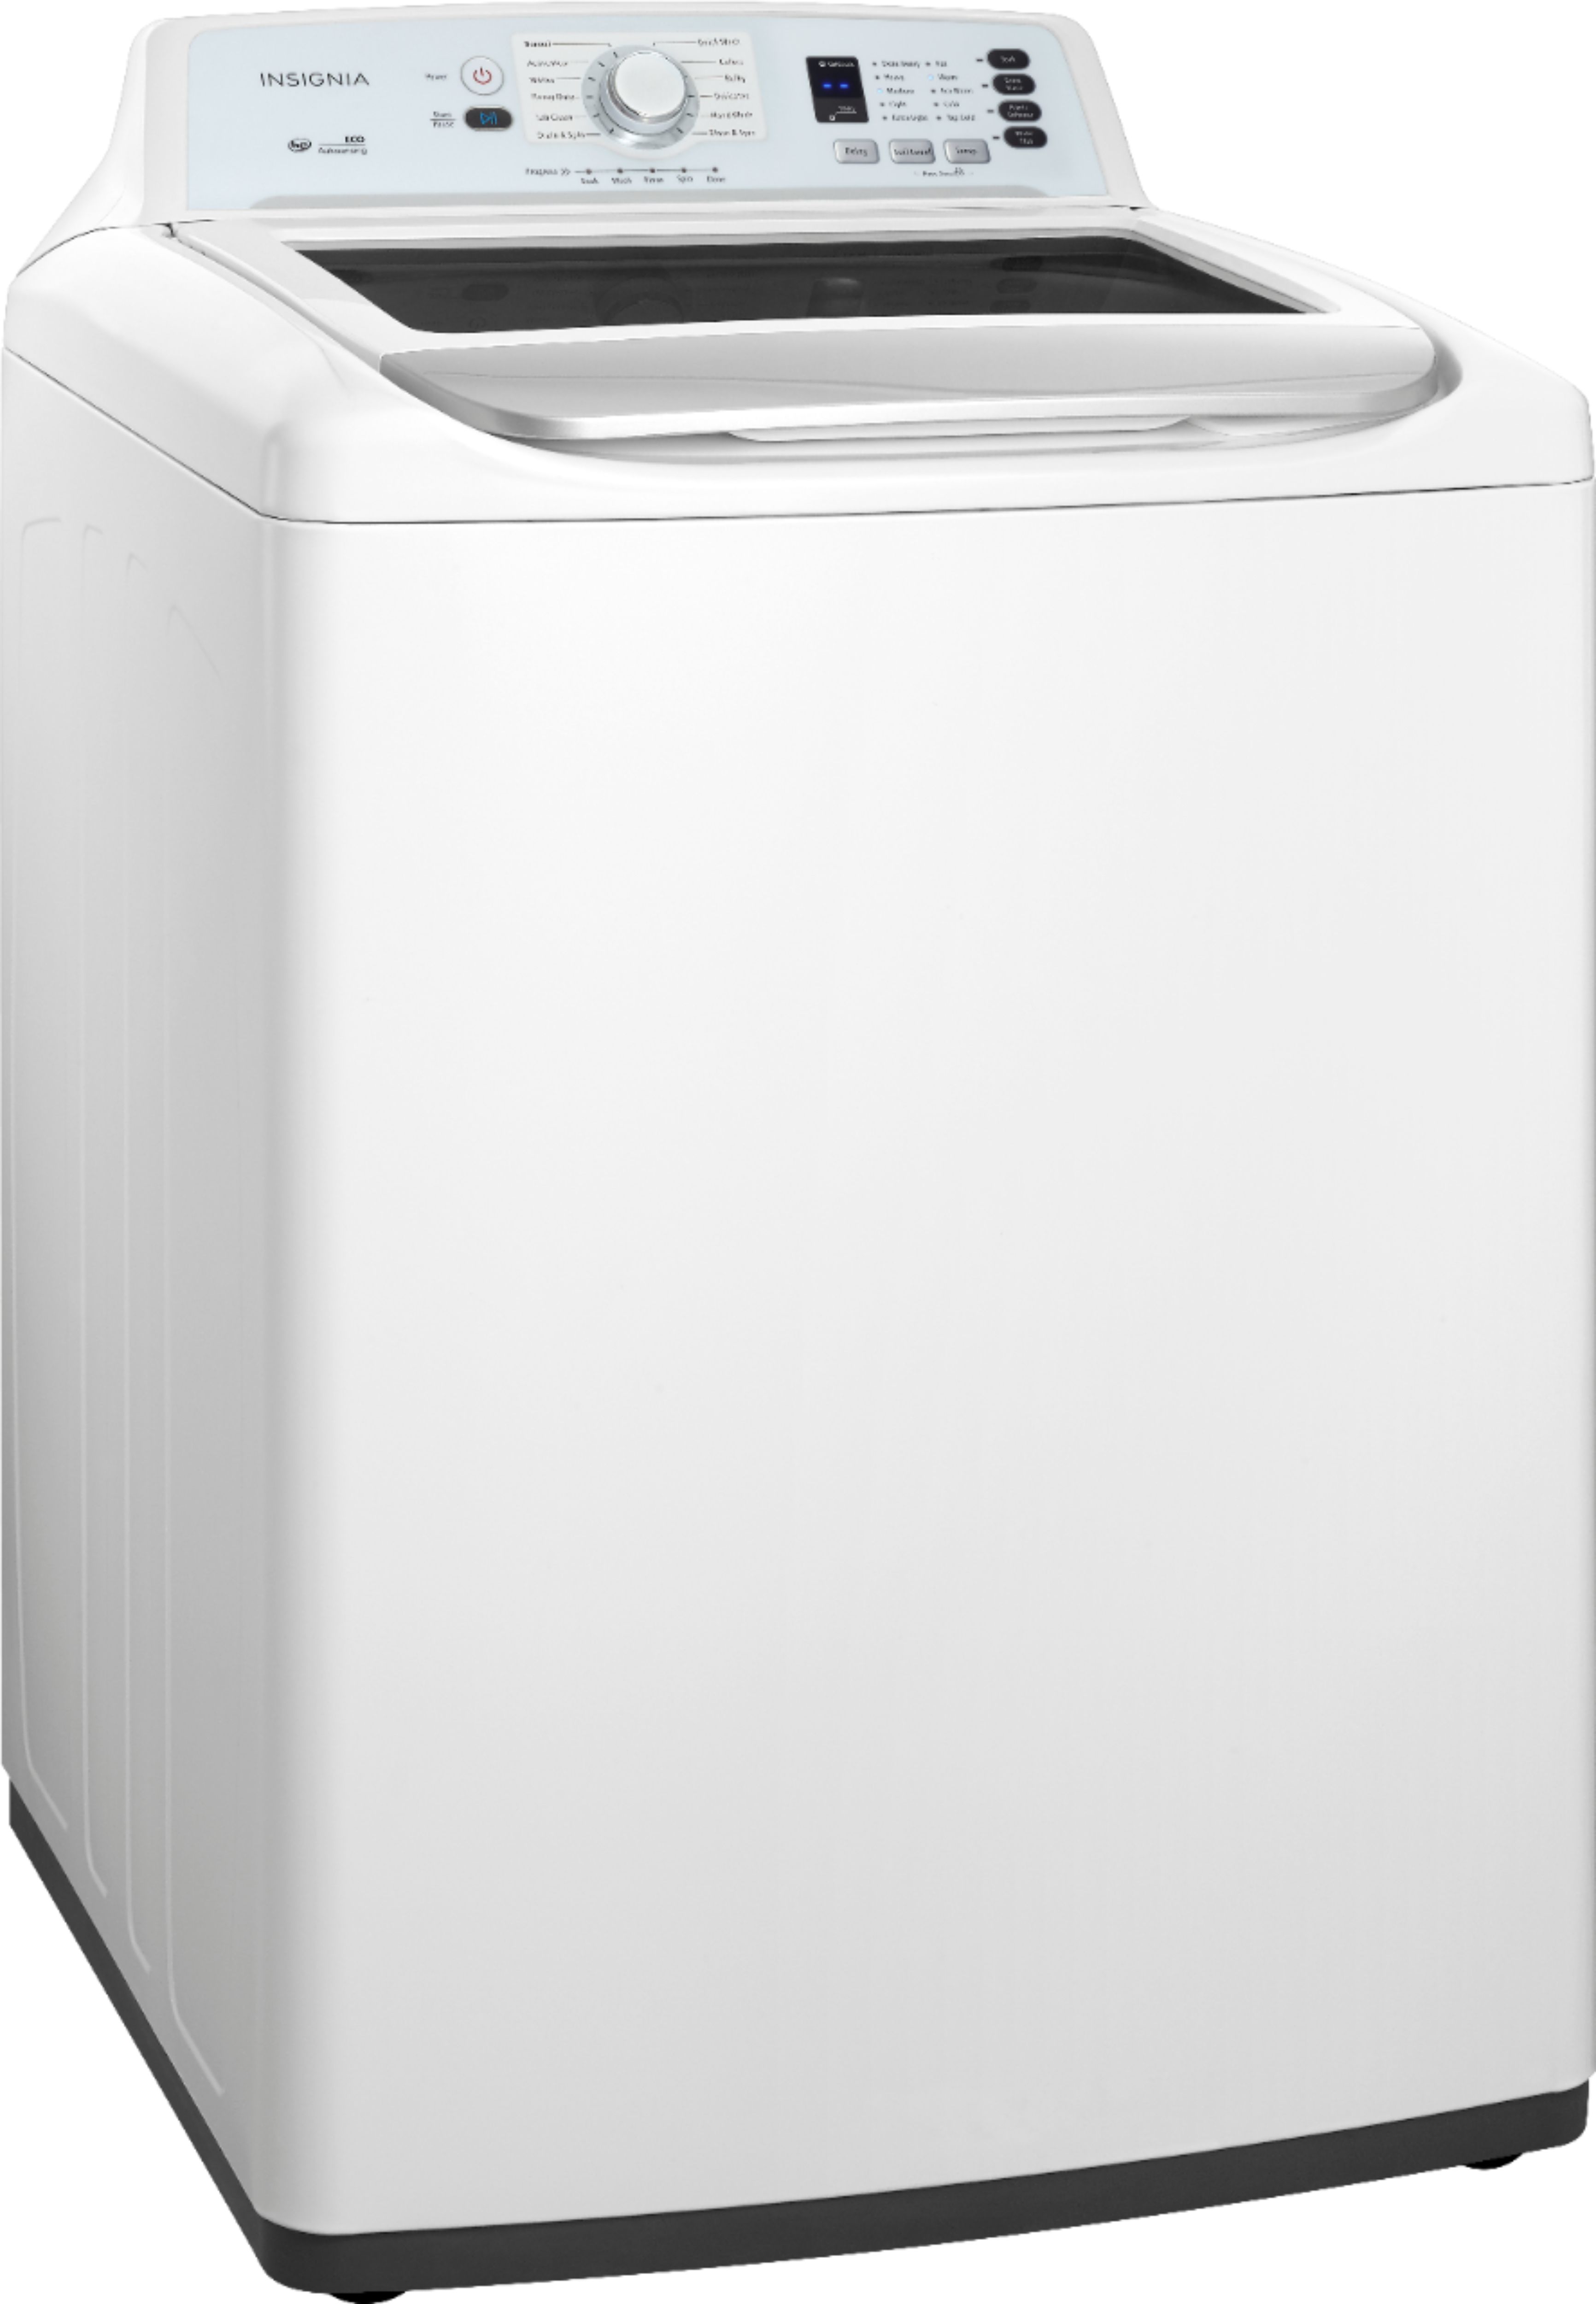 Angle View: Insignia™ - 4.1 Cu. Ft. High Efficiency Top Load Washer - White